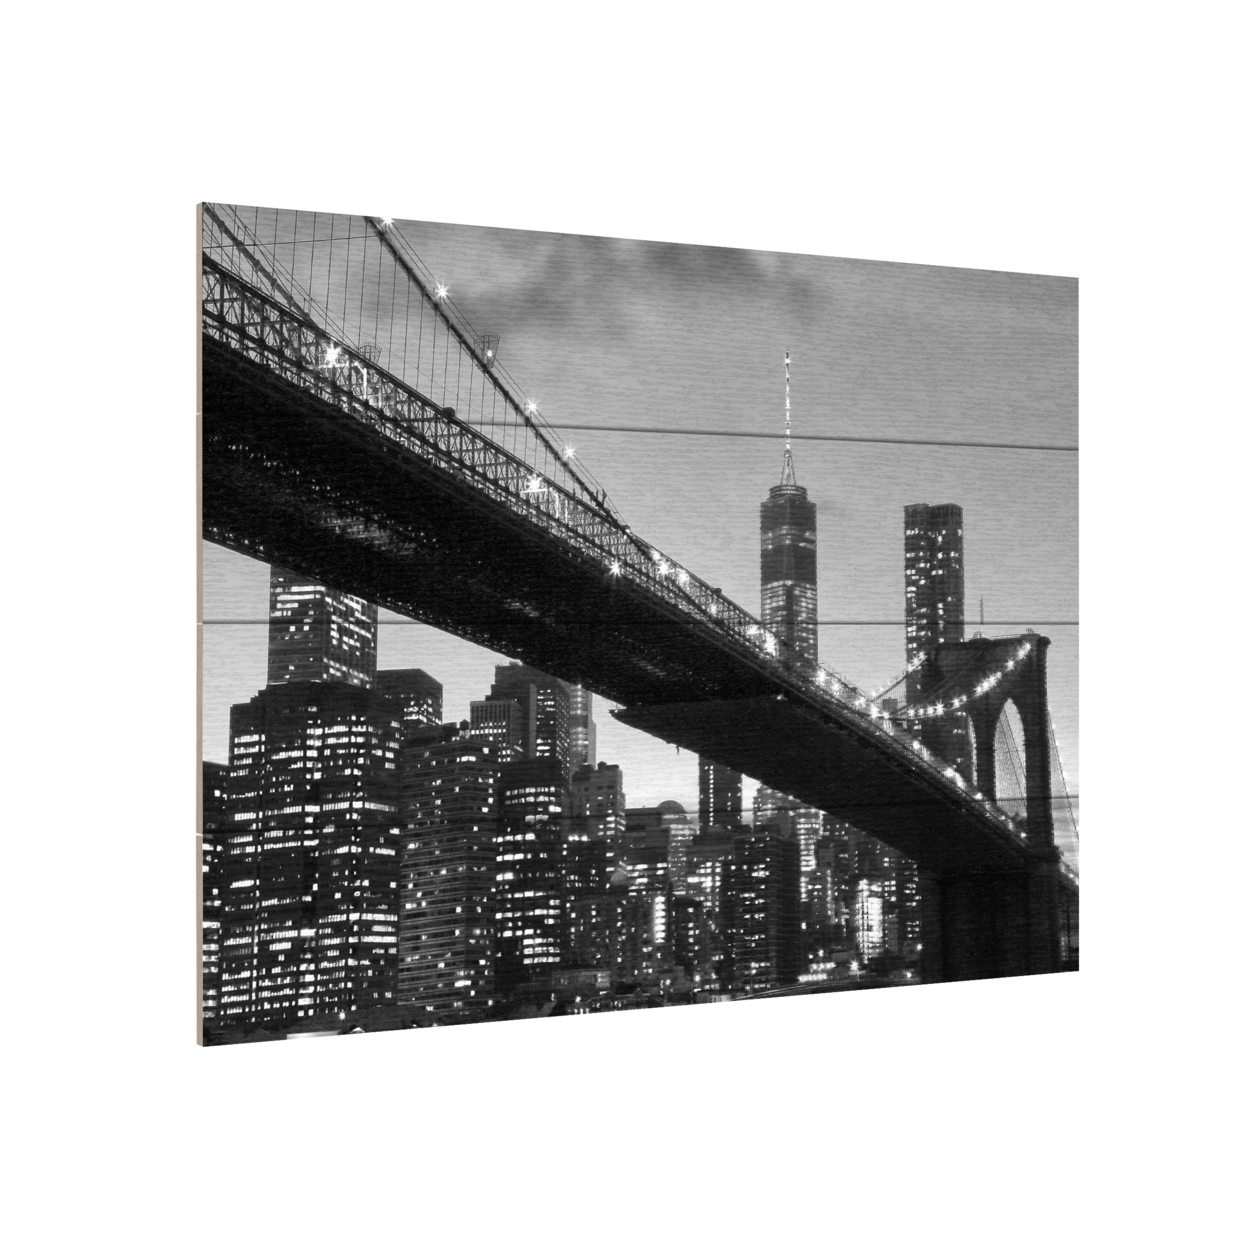 Wall Art 12 X 16 Inches Titled Brooklyn Bridge 5 Ready To Hang Printed On Wooden Planks